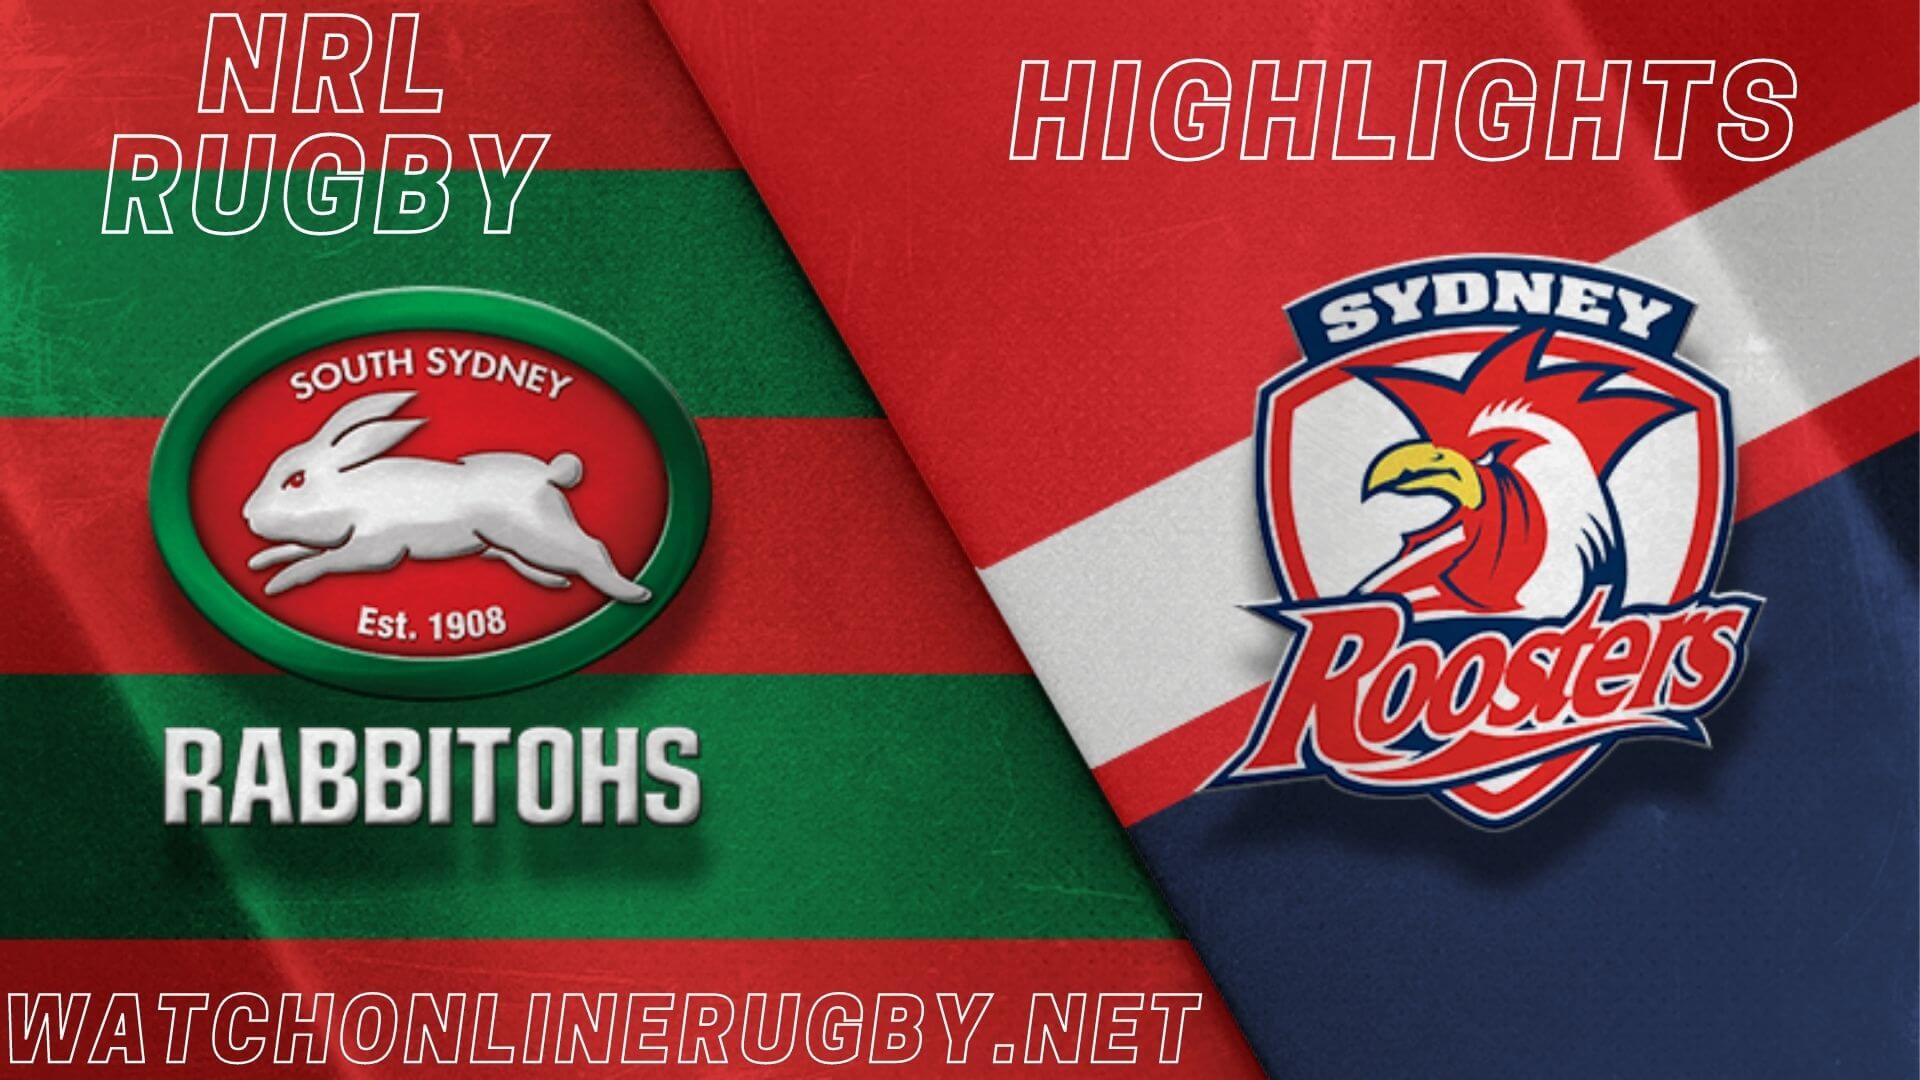 Rabbitohs Vs Roosters Highlights RD 3 NRL Rugby